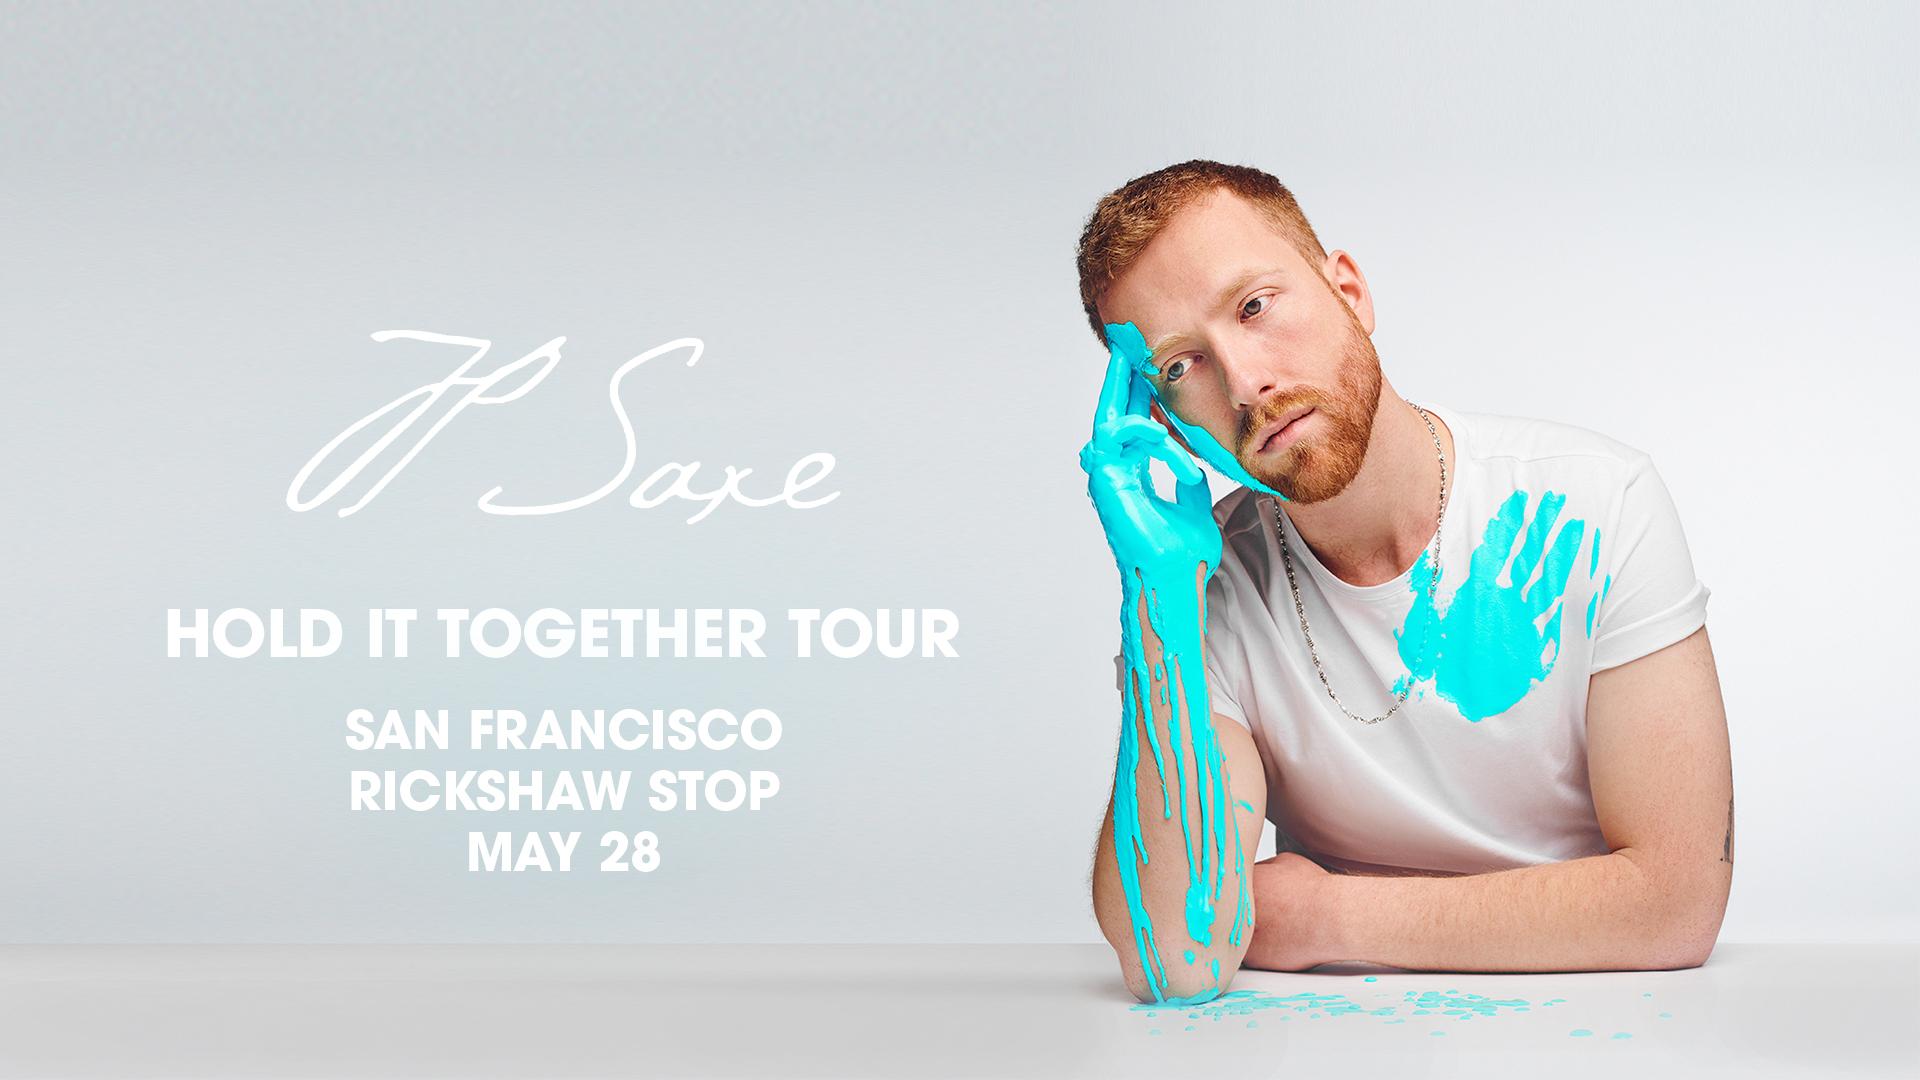 JP SAXE: Hold It Together Tour